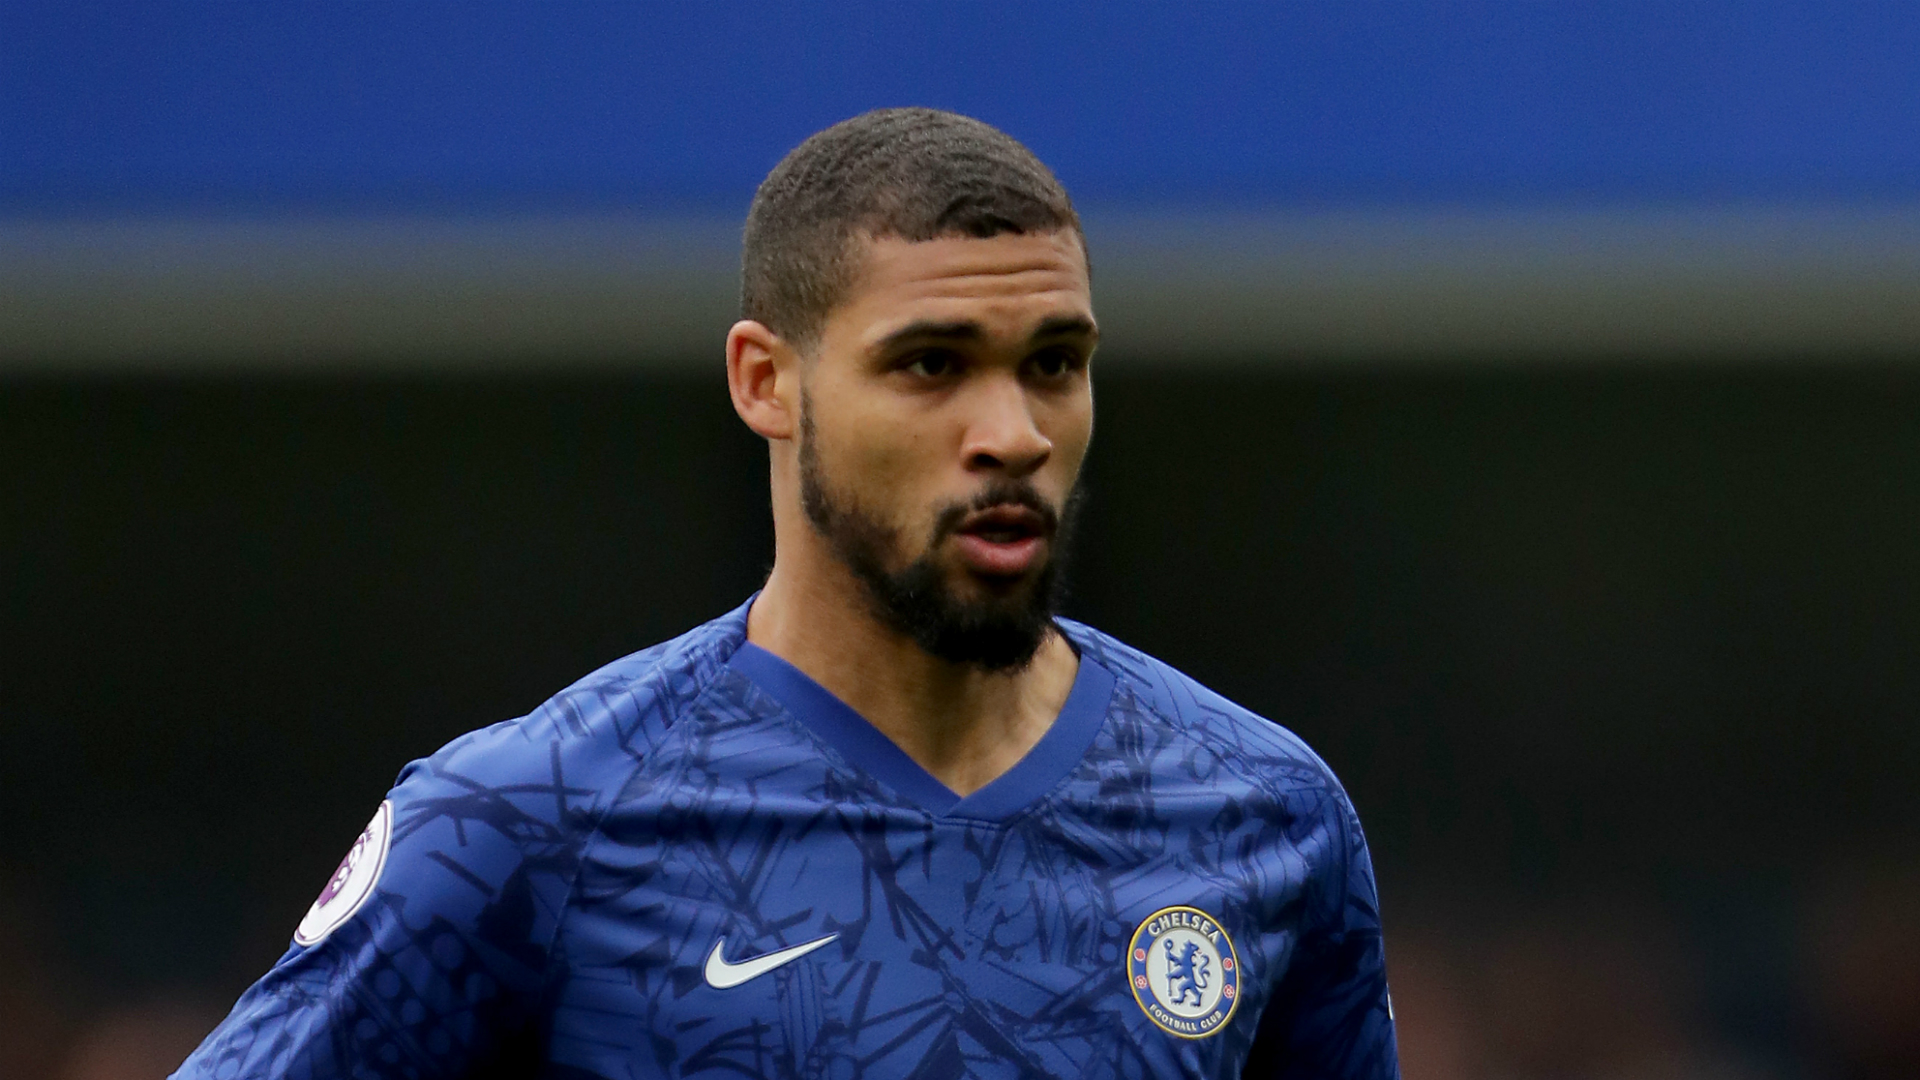 Chelsea and England midfielder Ruben Loftus-Cheek faces a long road to recovery after suffering a ruptured Achilles tendon.